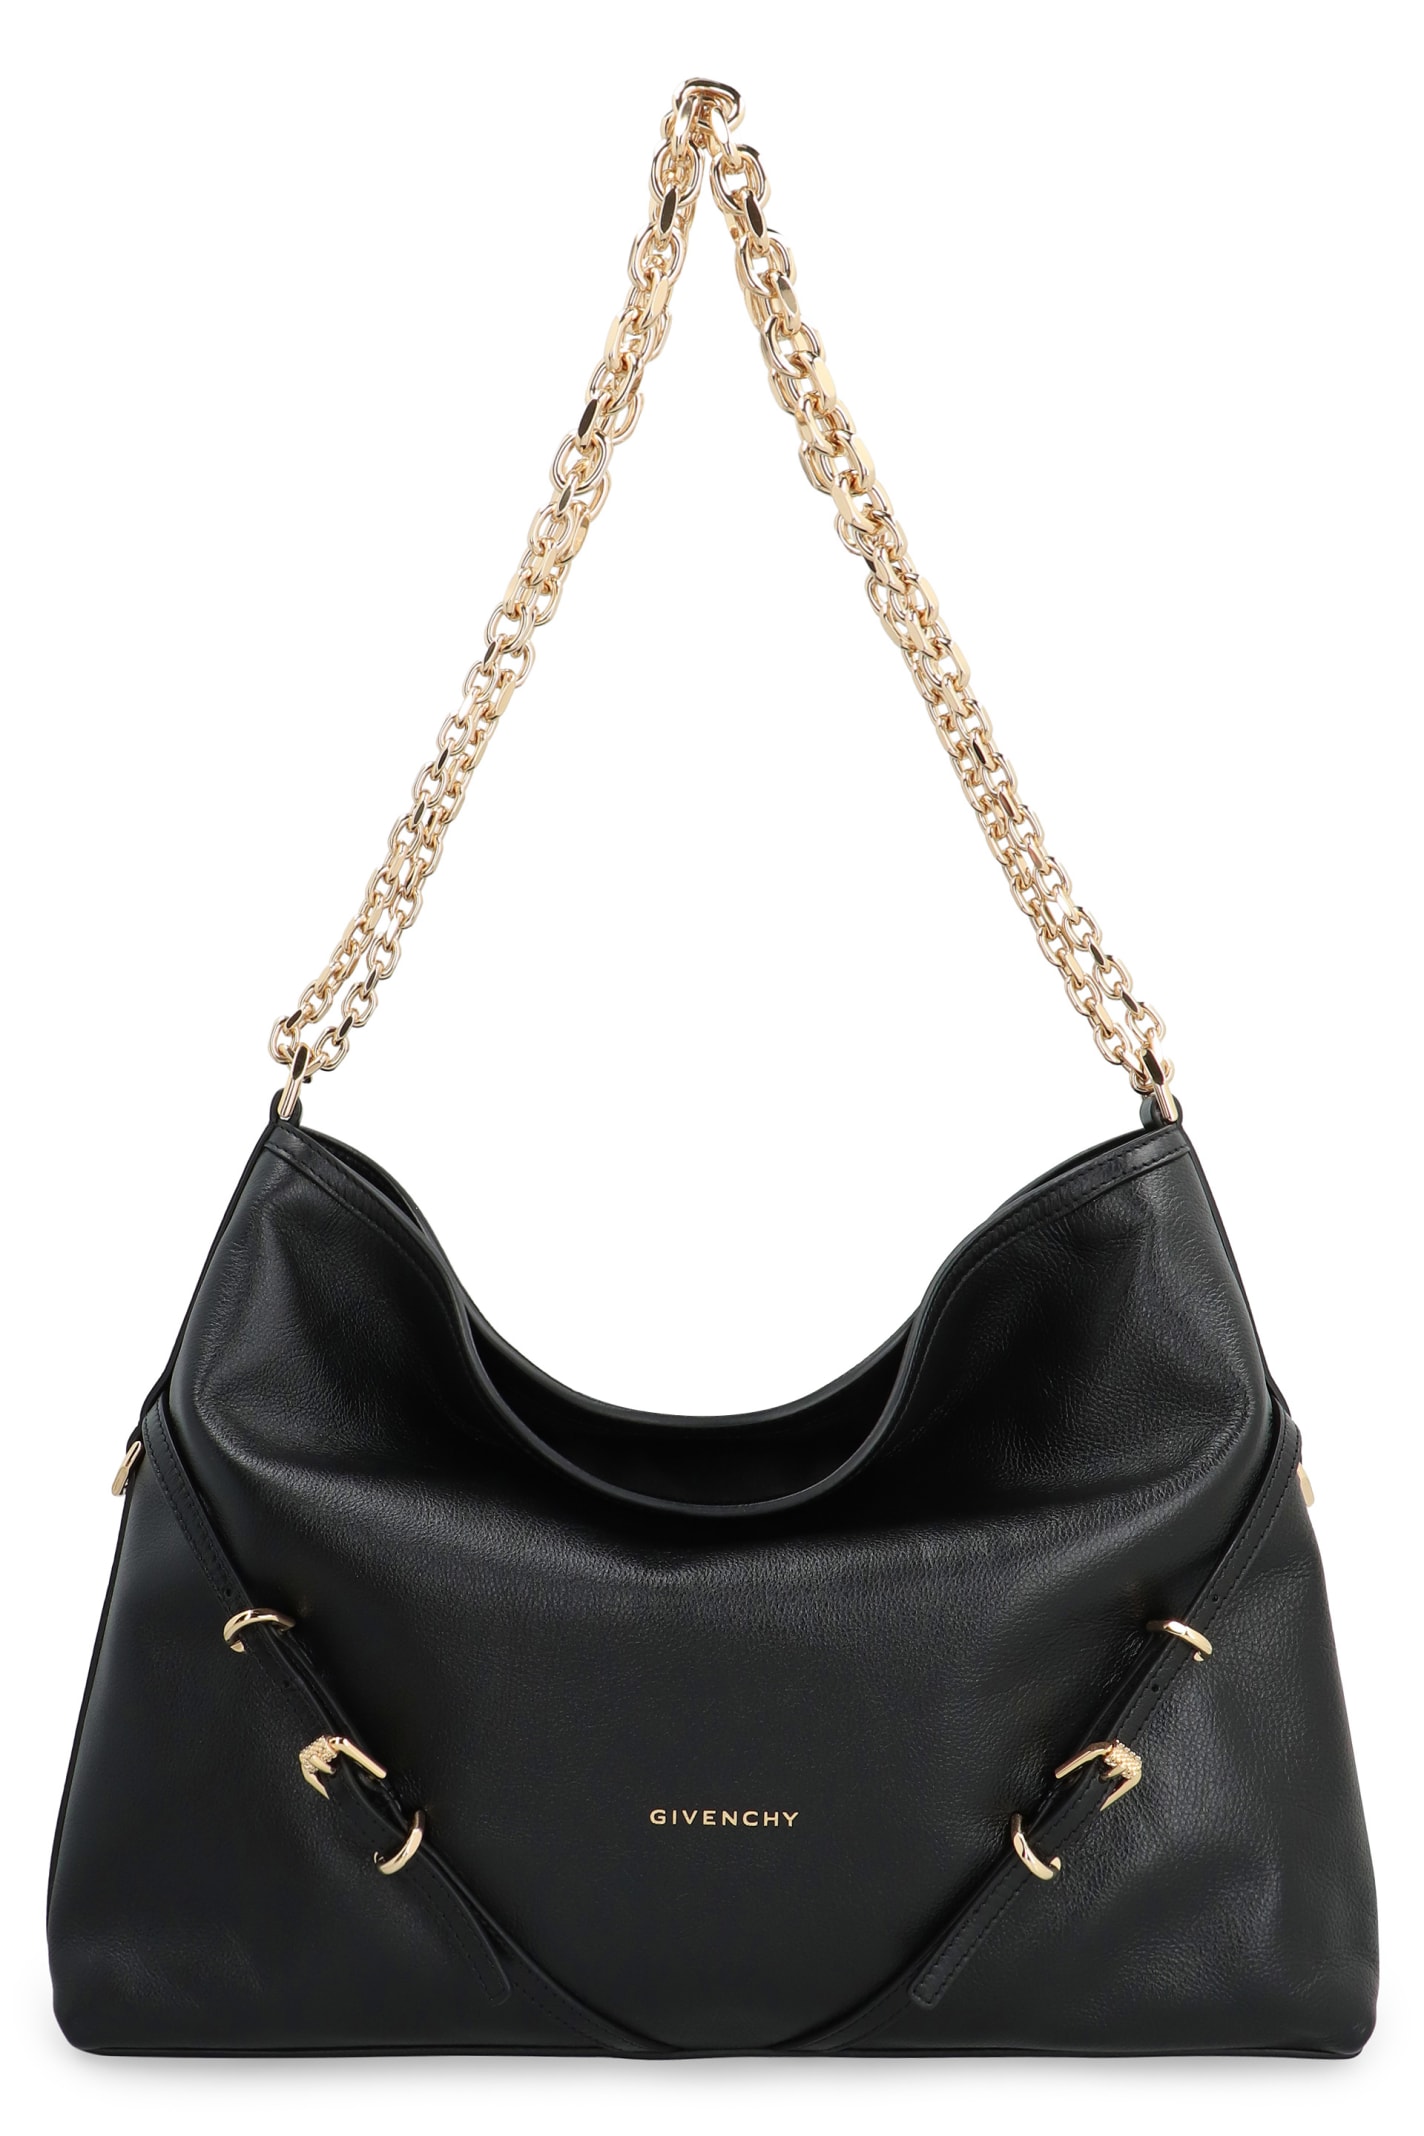 GIVENCHY VOYOU CHAIN LEATHER SHOULDER BAG